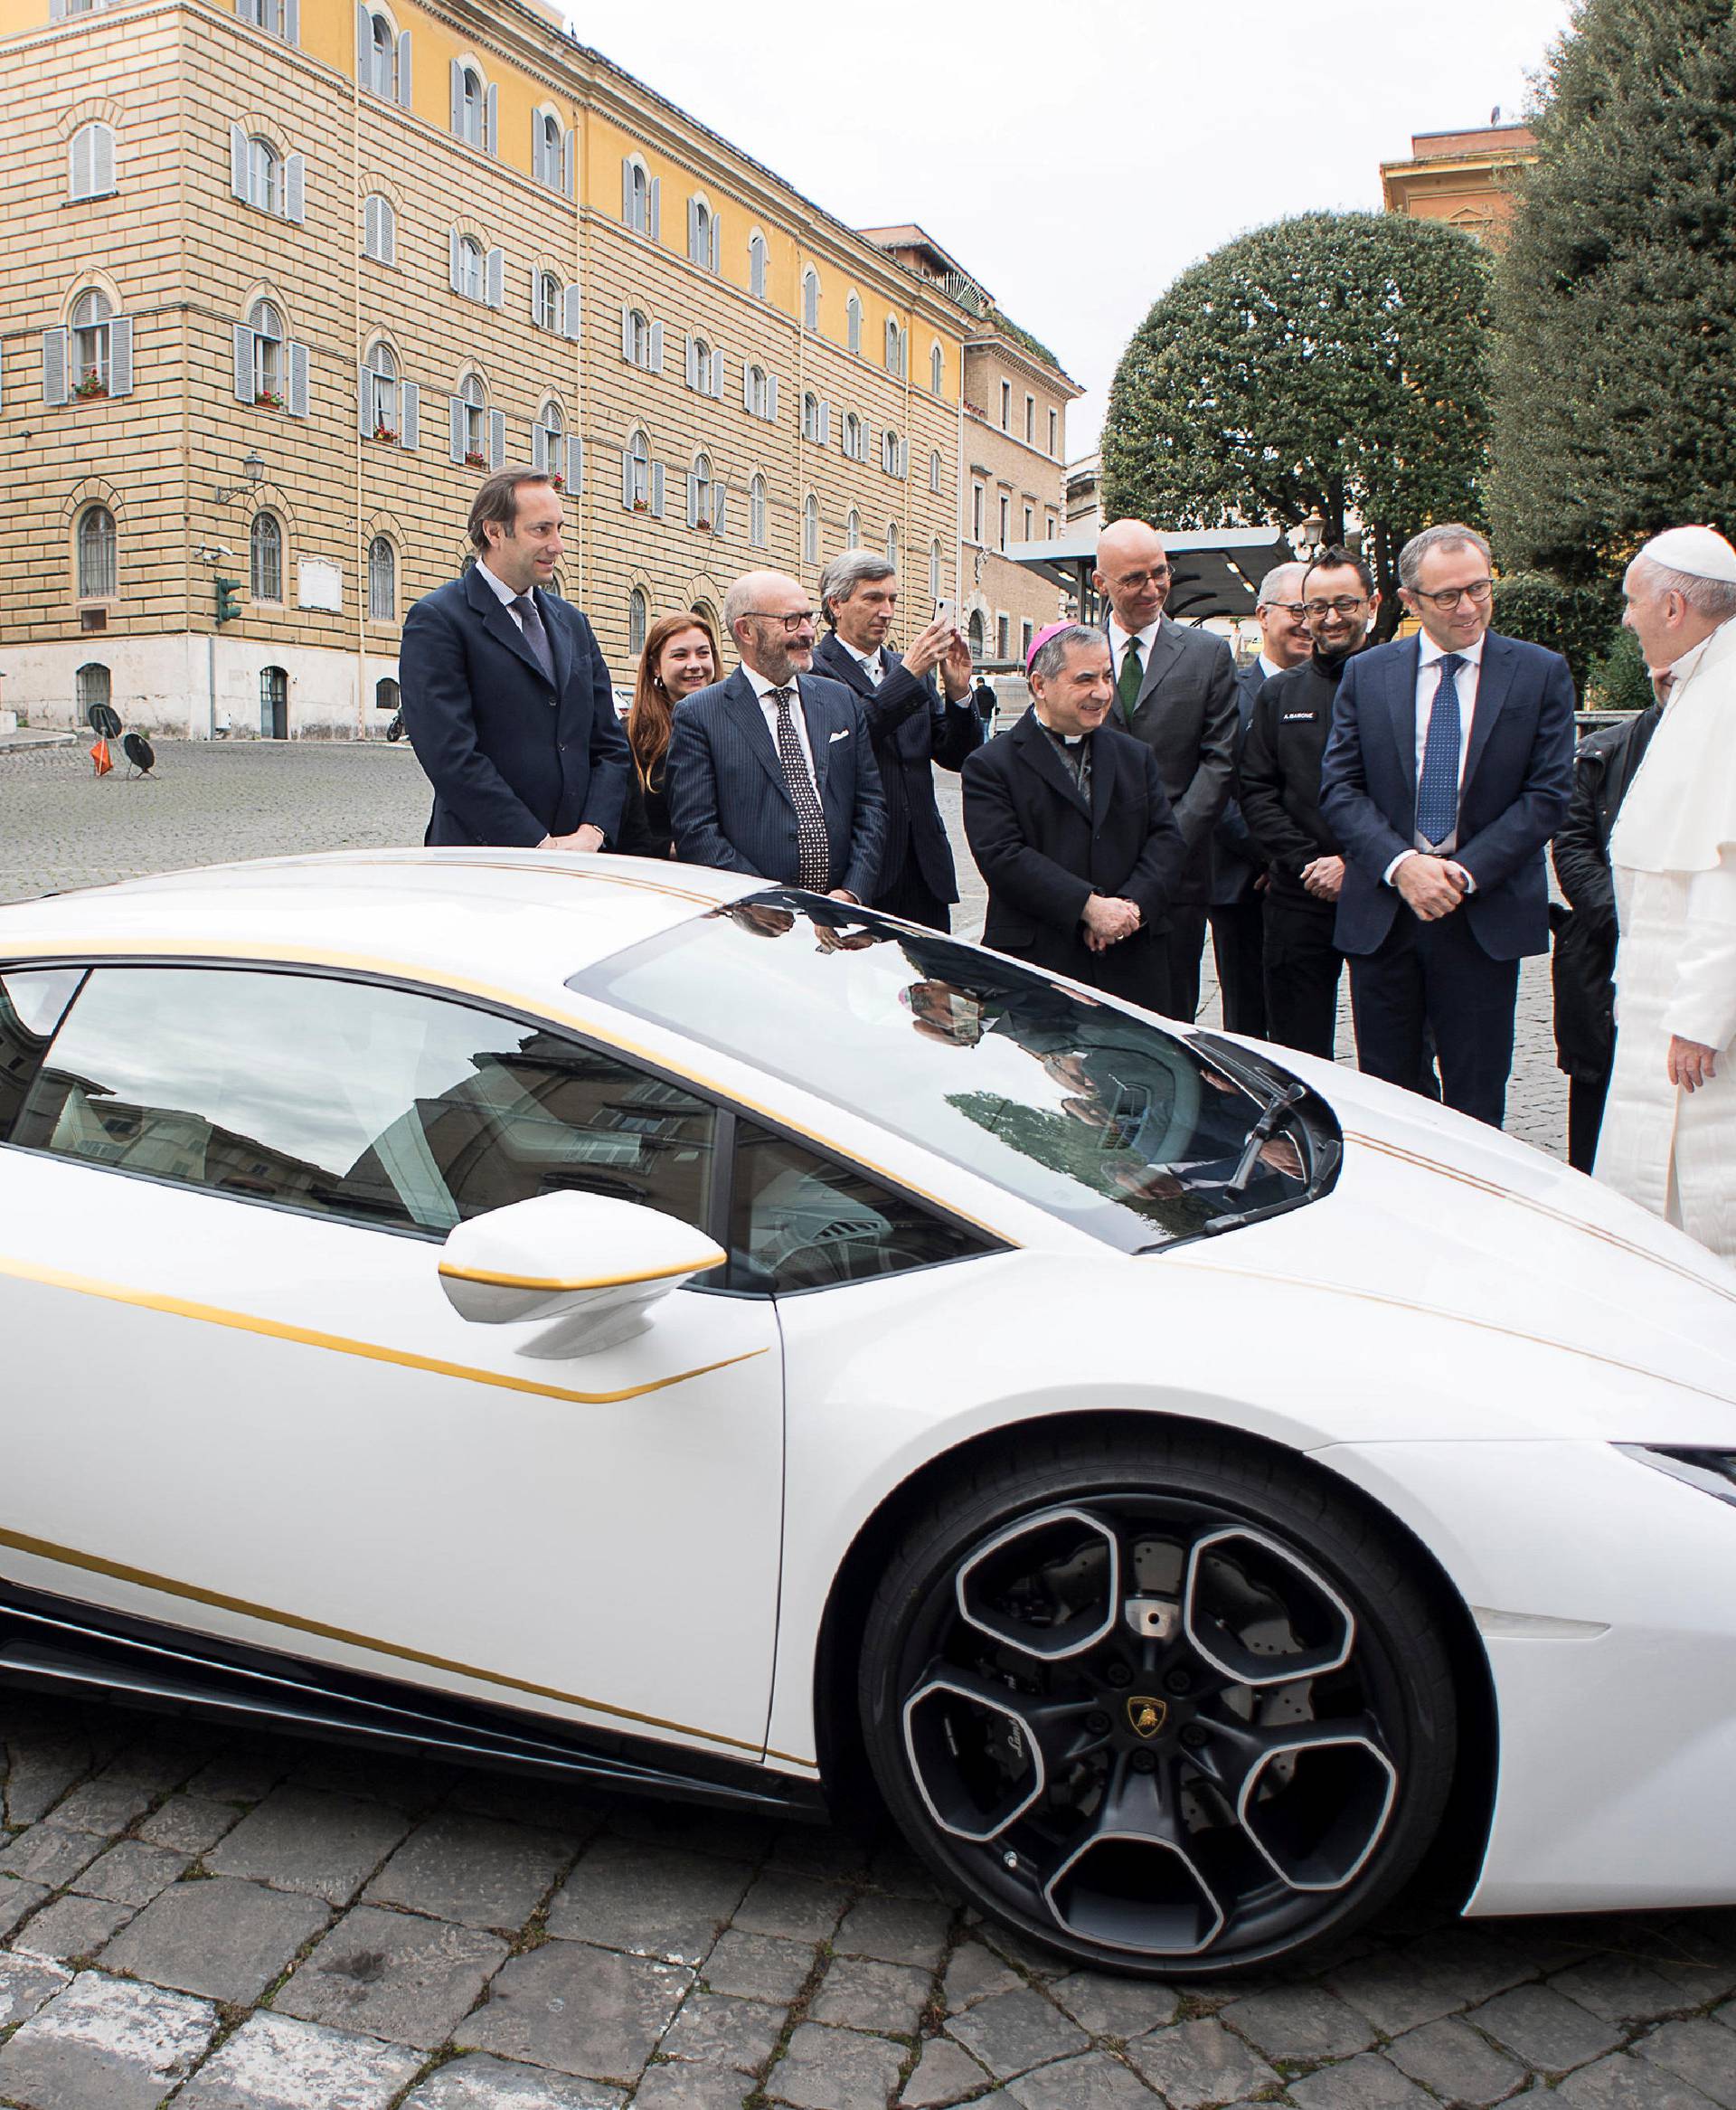 Pope Francis receives a Lamborghini Huracan prior to his Wednesday general audience in Saint Peter's square at the Vatican